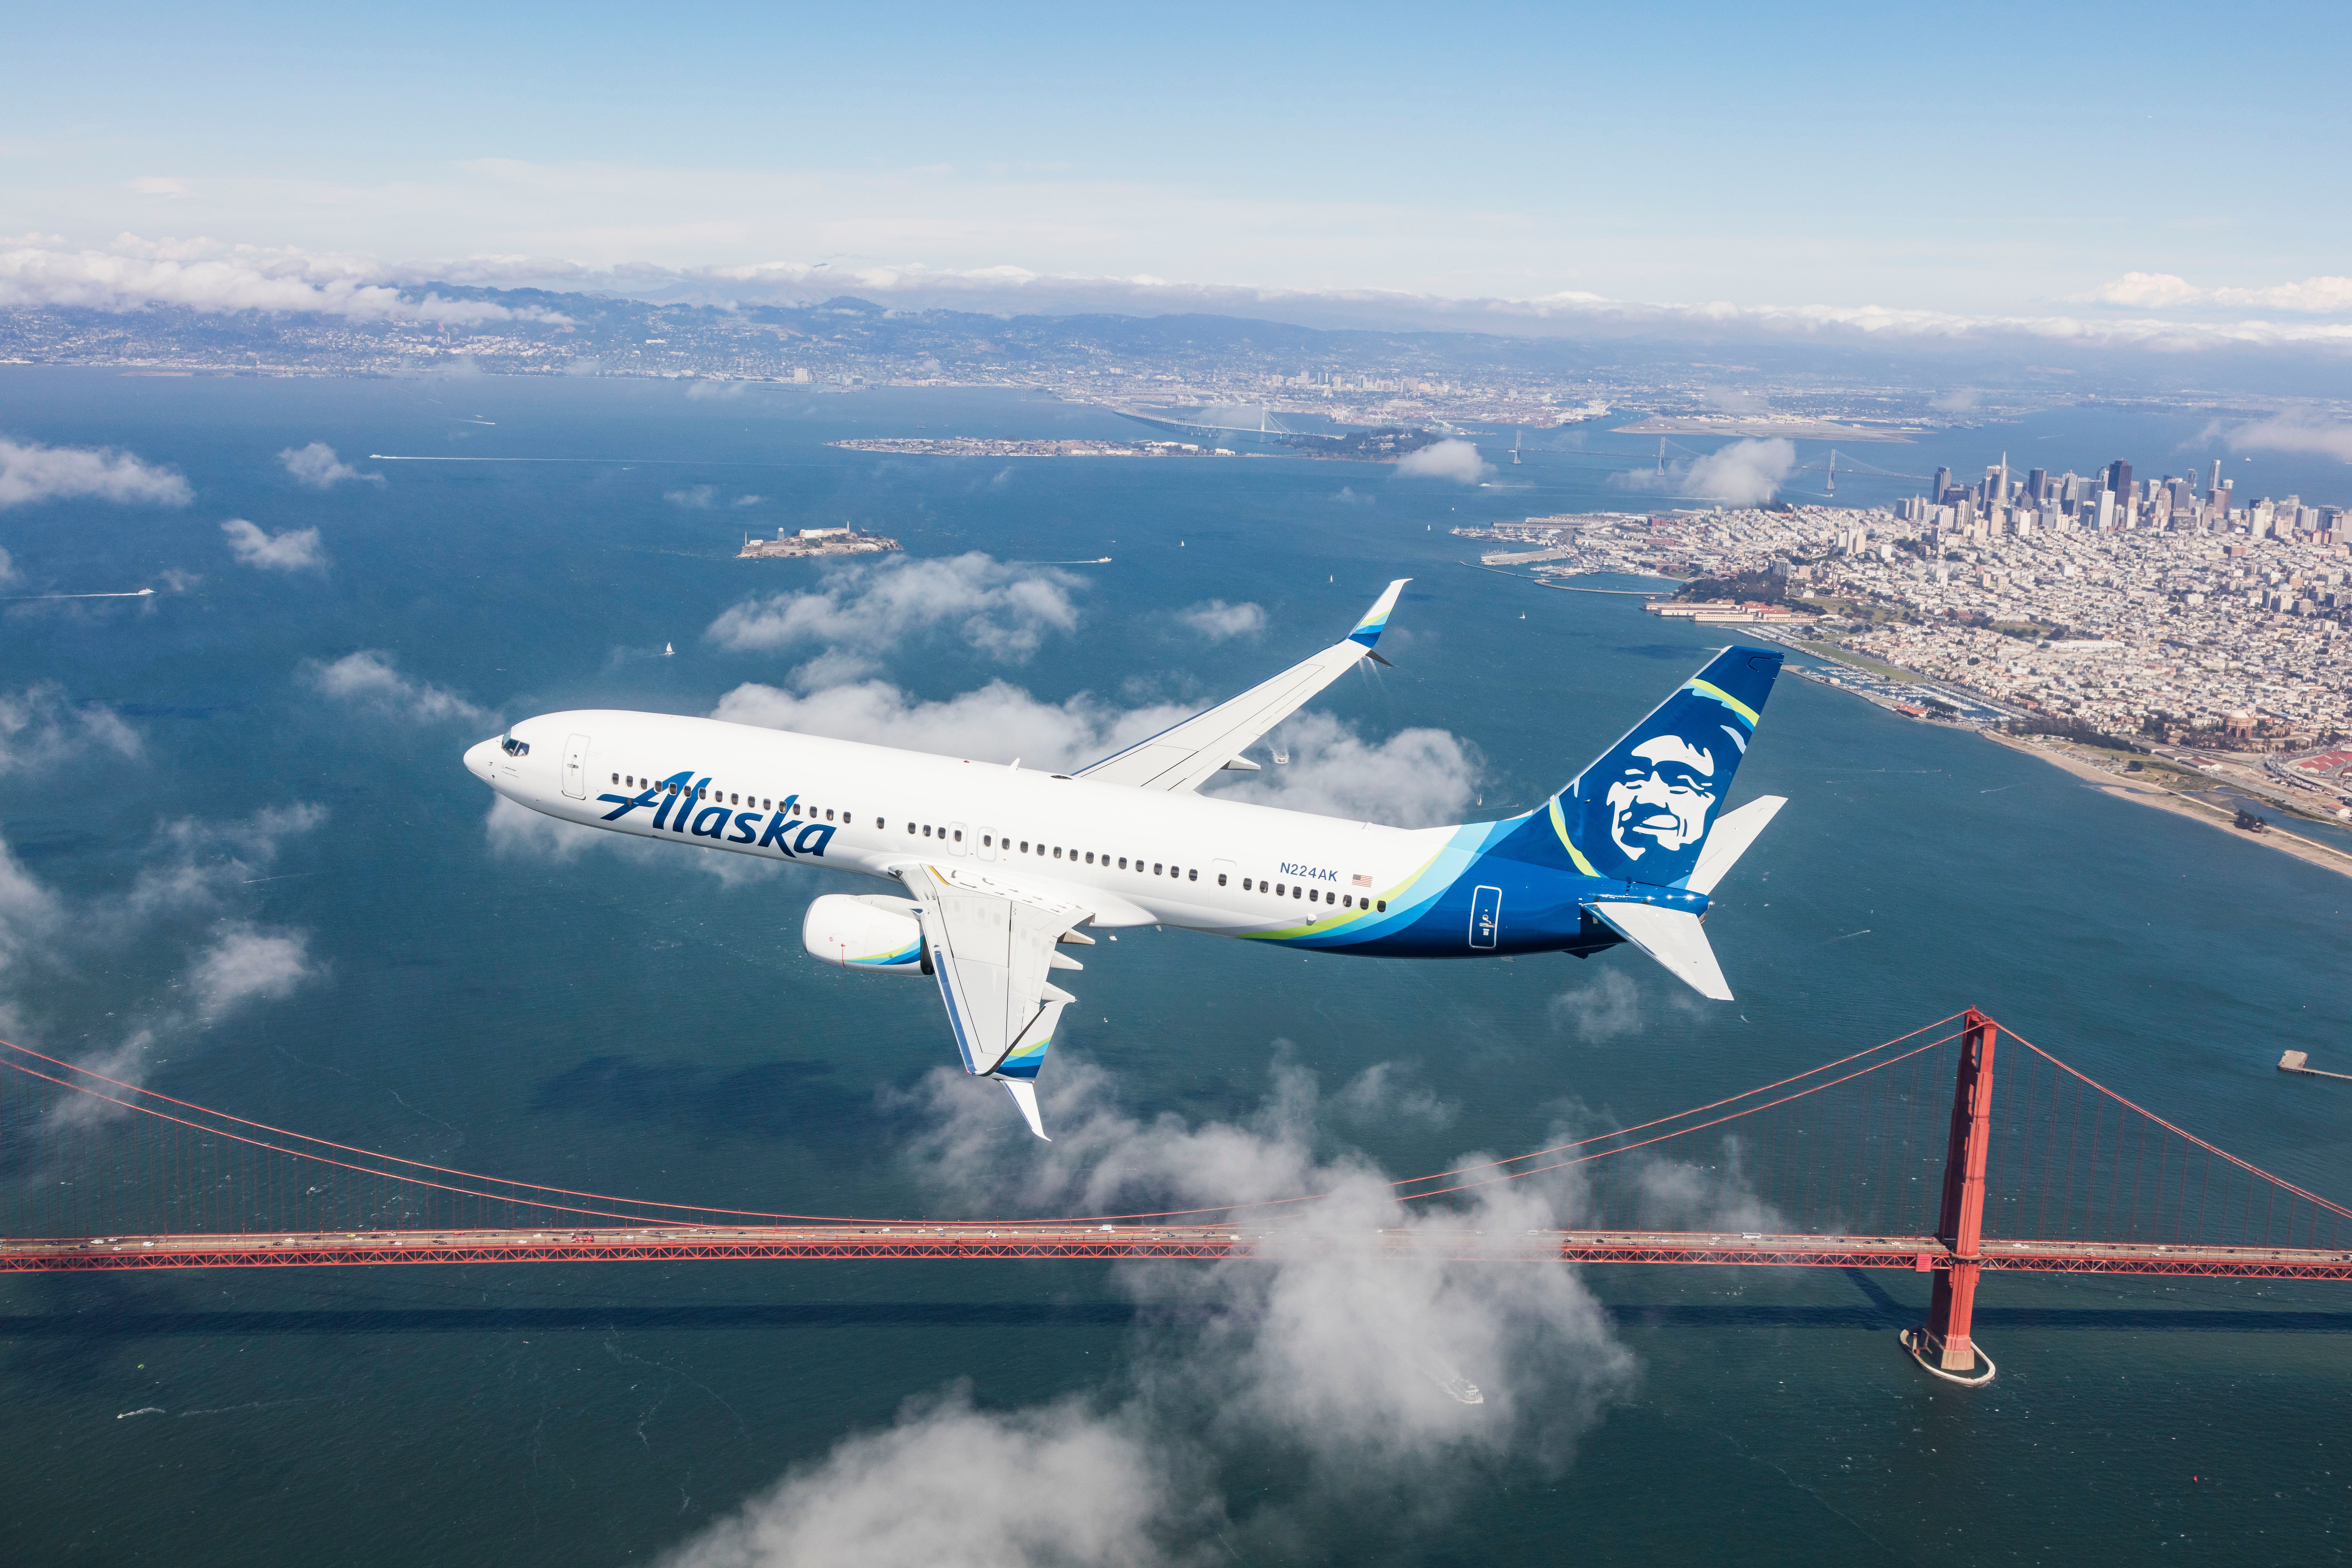 White Boeing 737 with Alaska Airlines livery flies over the Golden Gate Bridge in San Francisco